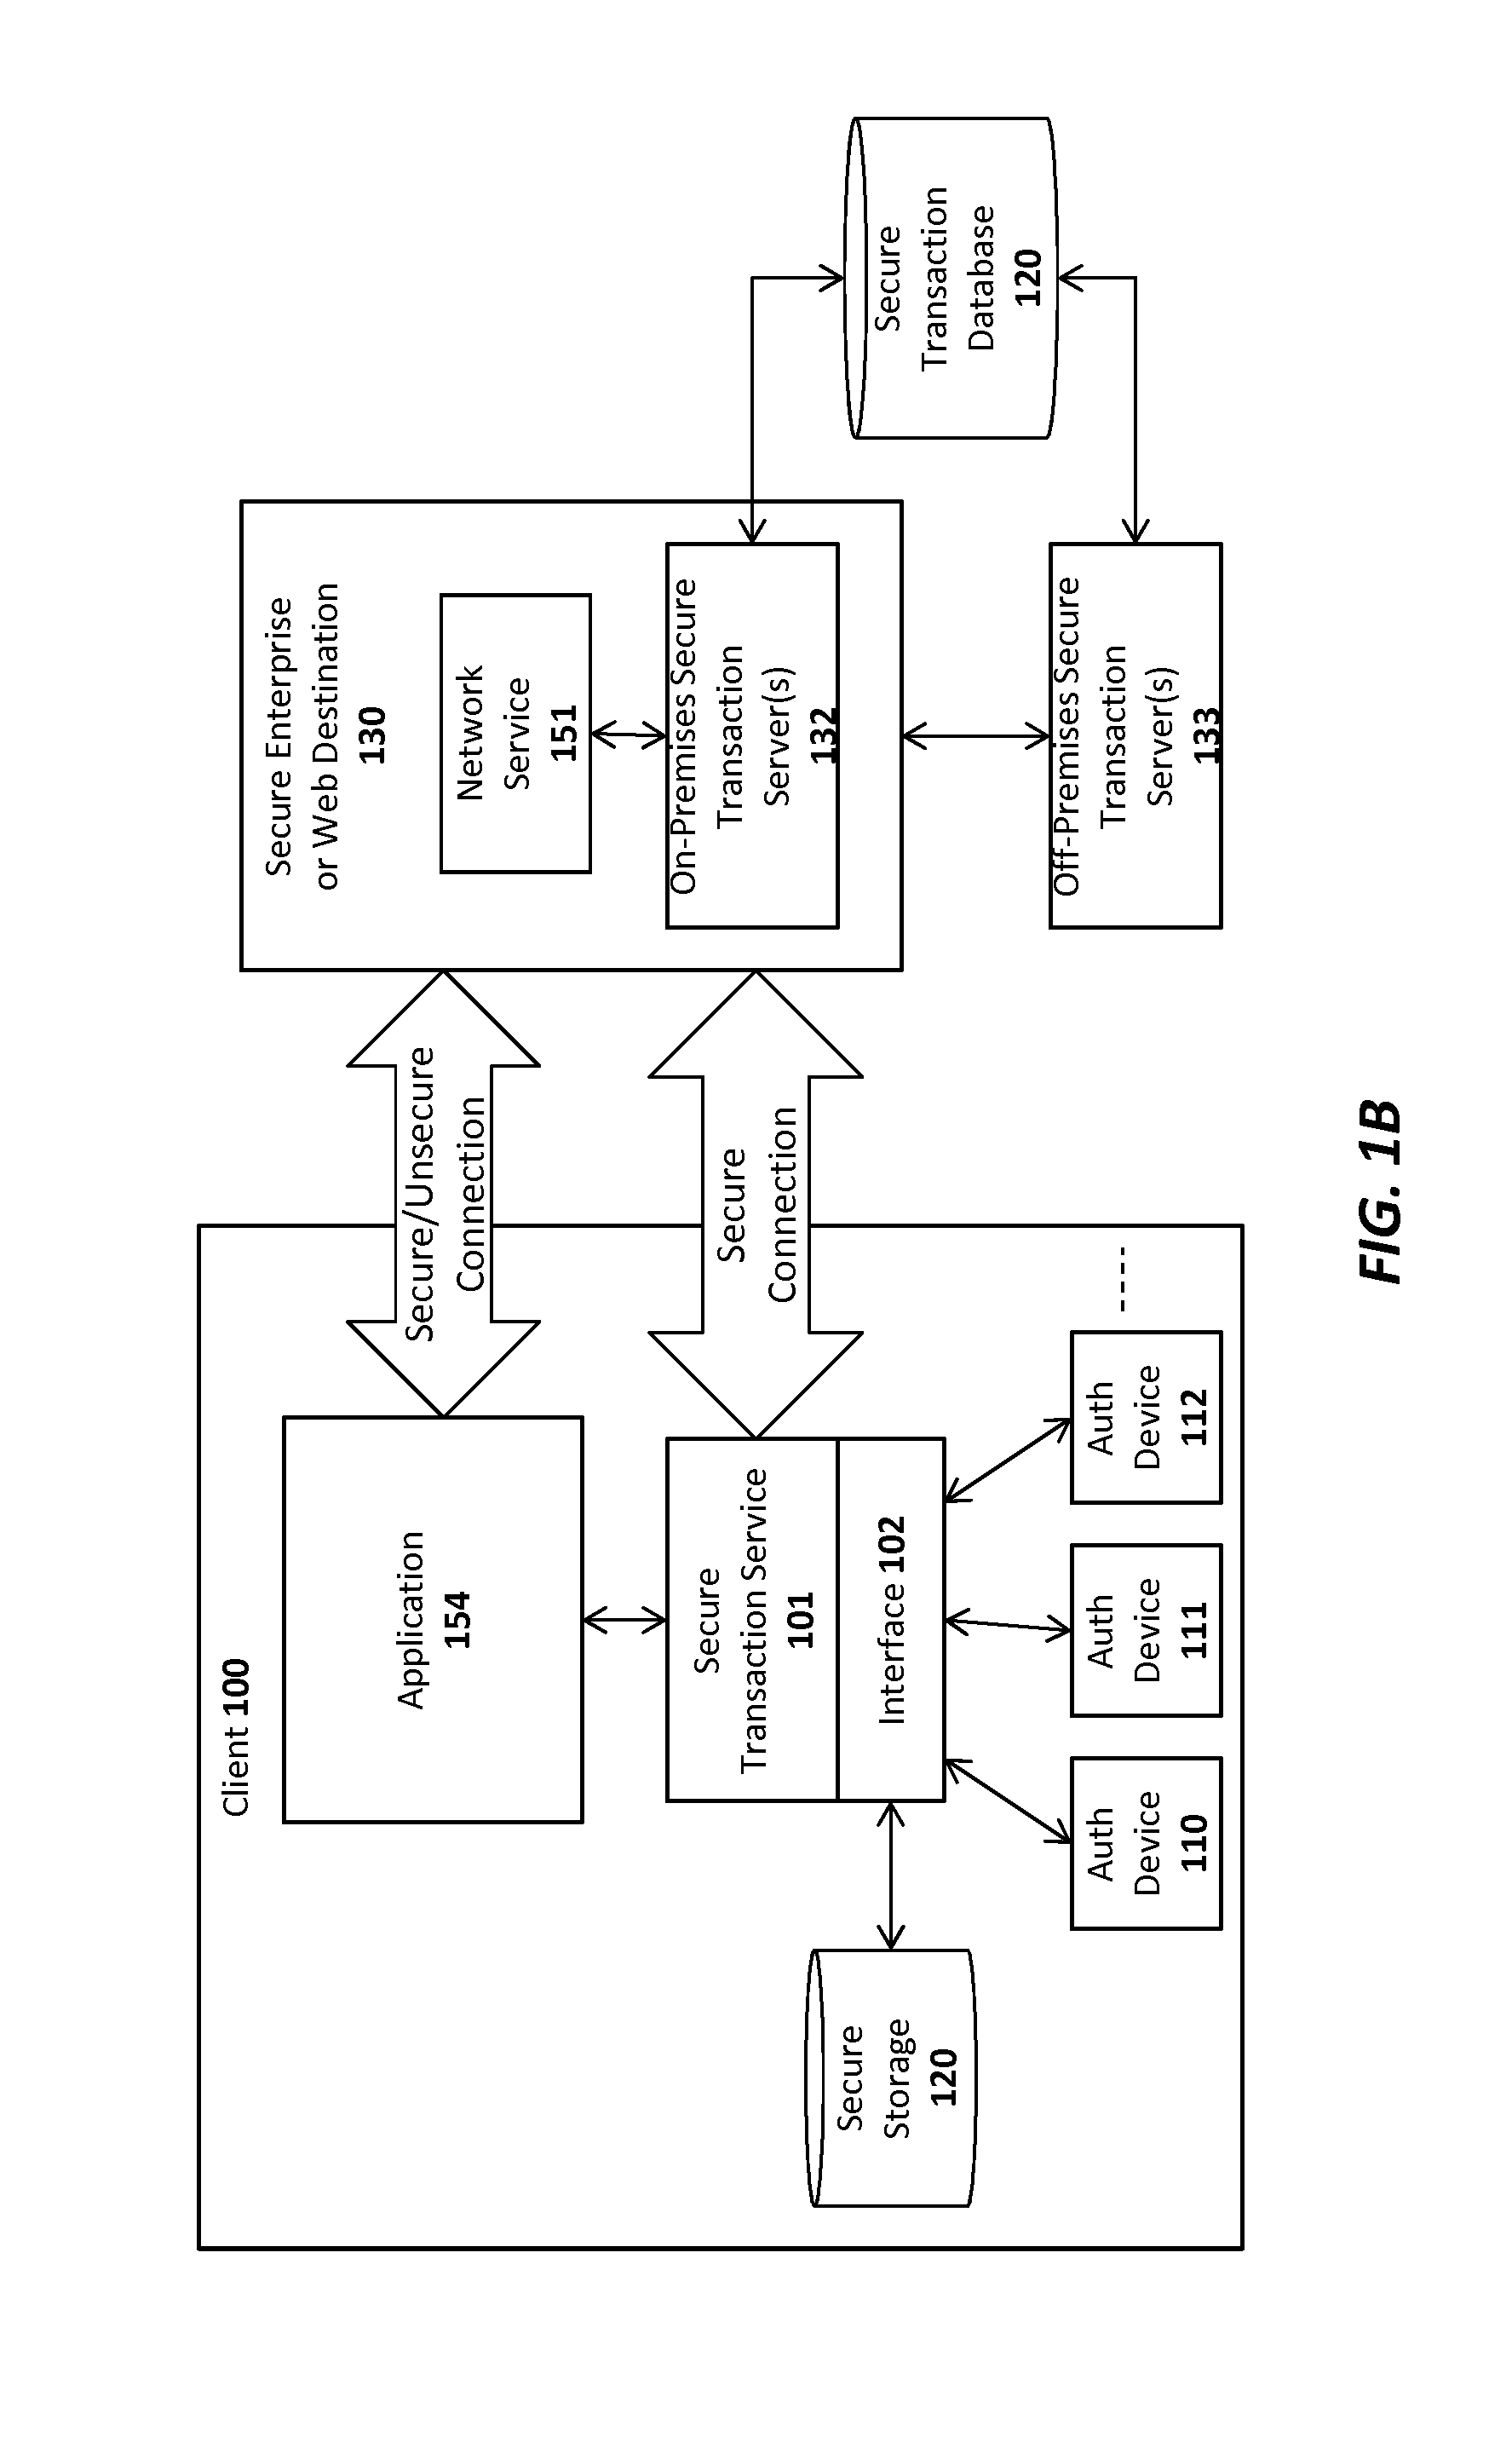 System and method for integrating an authentication service within a network architecture